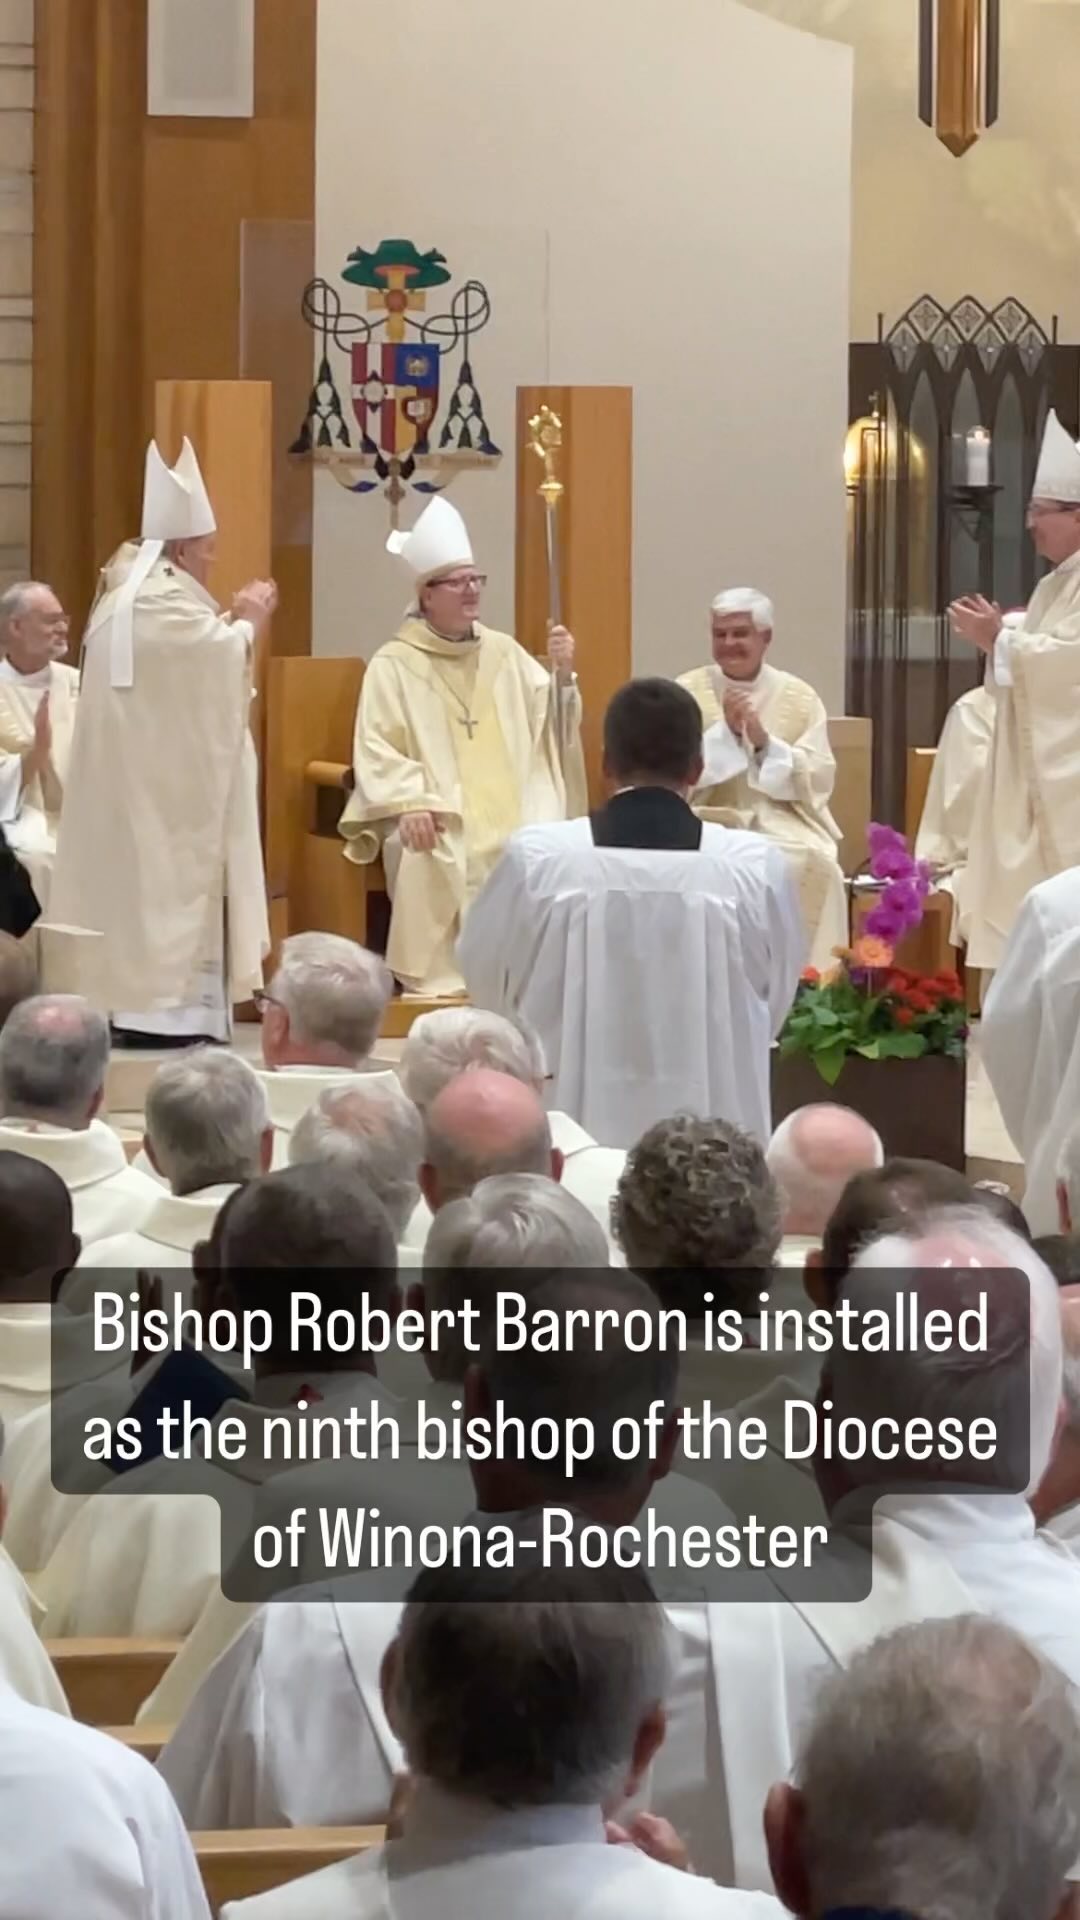 @bishopbarron , well known as the founder of @wordonfire_catholicministries, was installed July 29. Above, the assembly applauds as he receives his crosier. #wordonfirecatholicministries #bishop #bishopinstallation #catholicsofinstagram